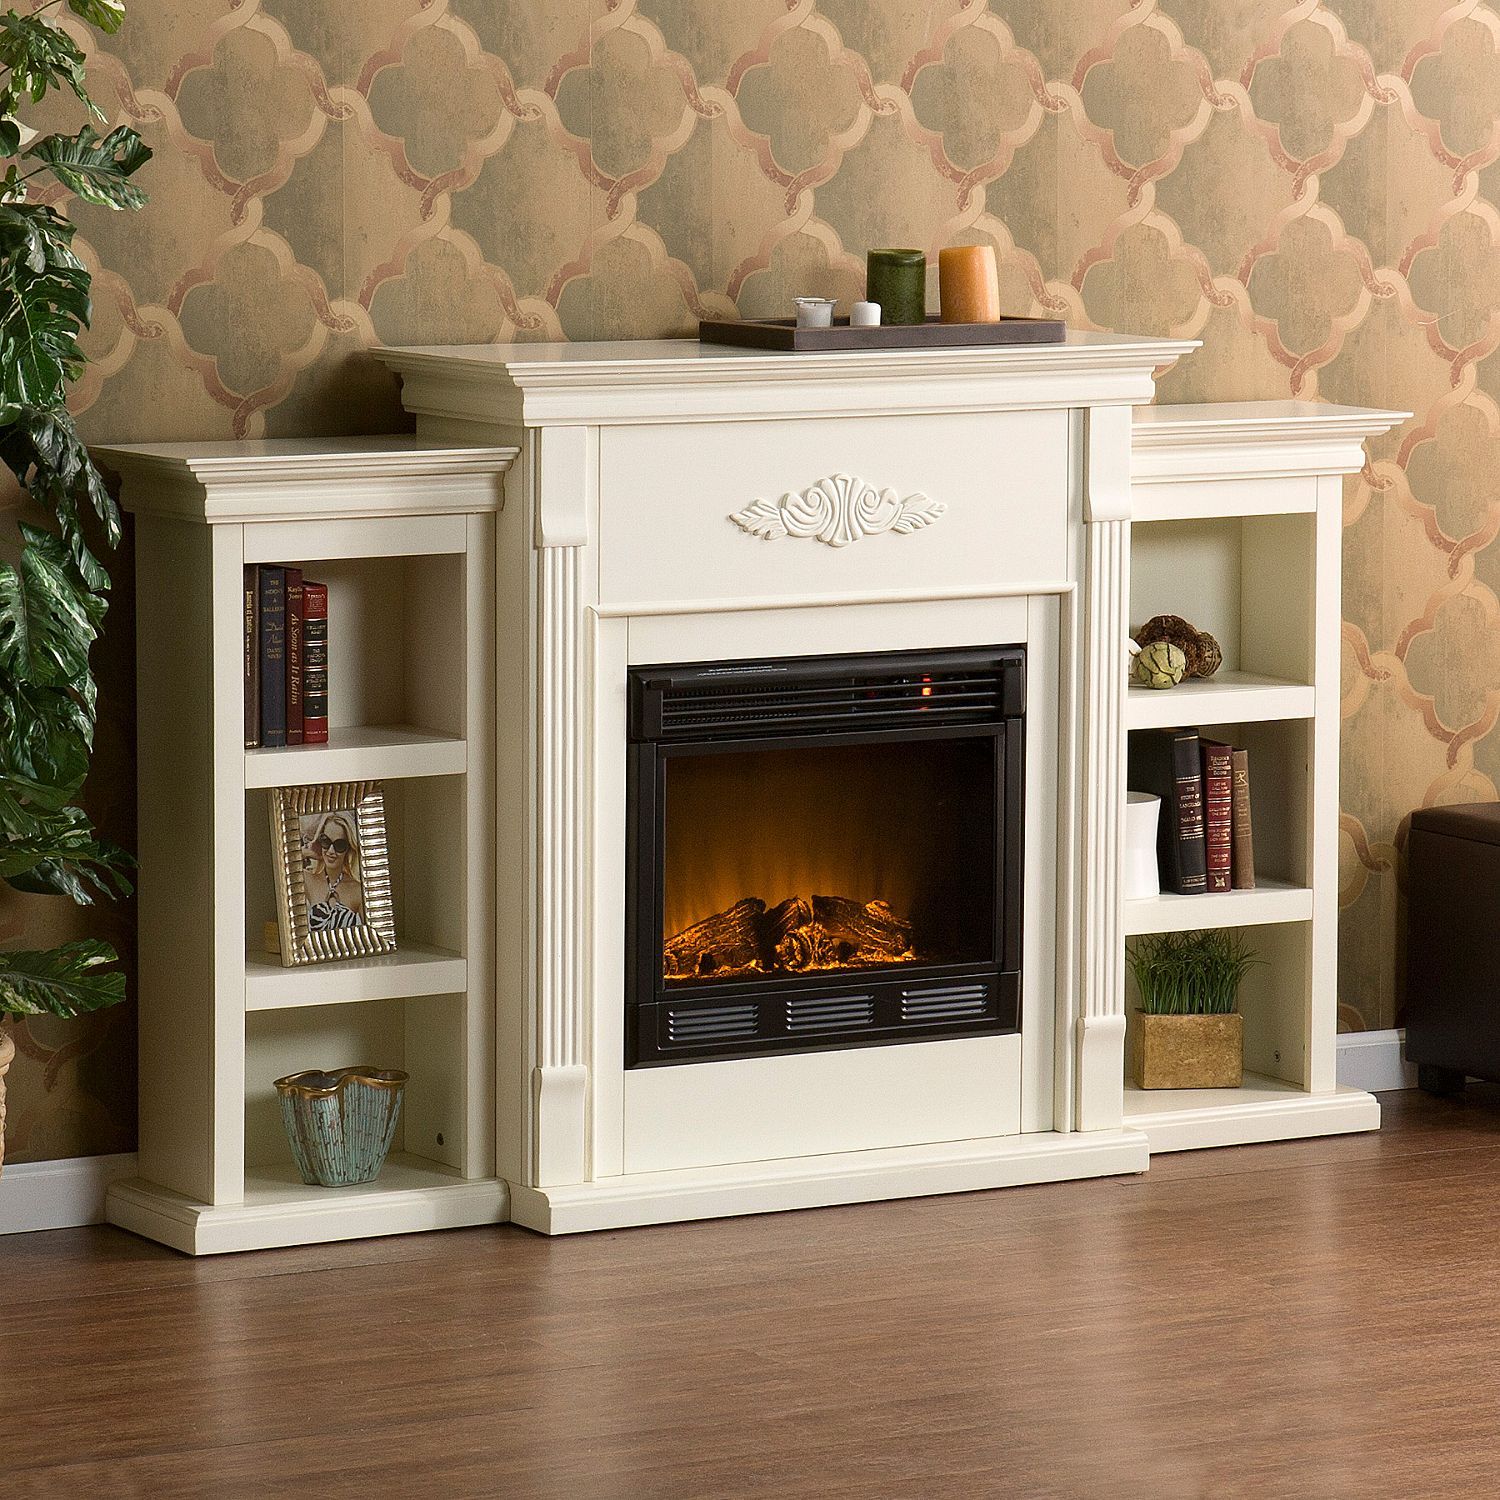 Black Electric Fireplace with Mantel Fresh Emerson Electric Fireplace Ivory Sam S Club